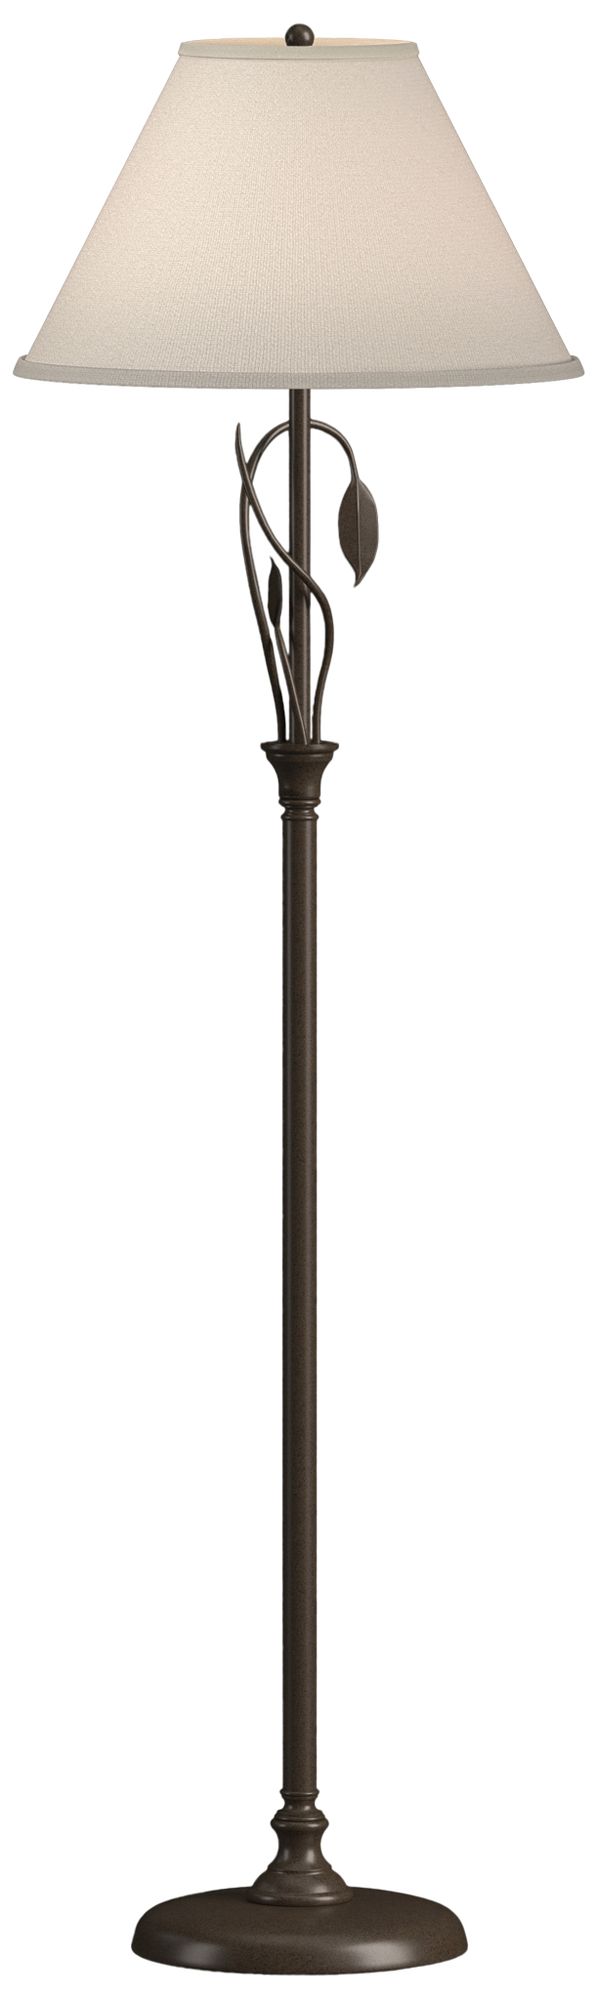 Forged Leaves and Vase 56"H Bronze Floor Lamp w/ Natural Linen Shade